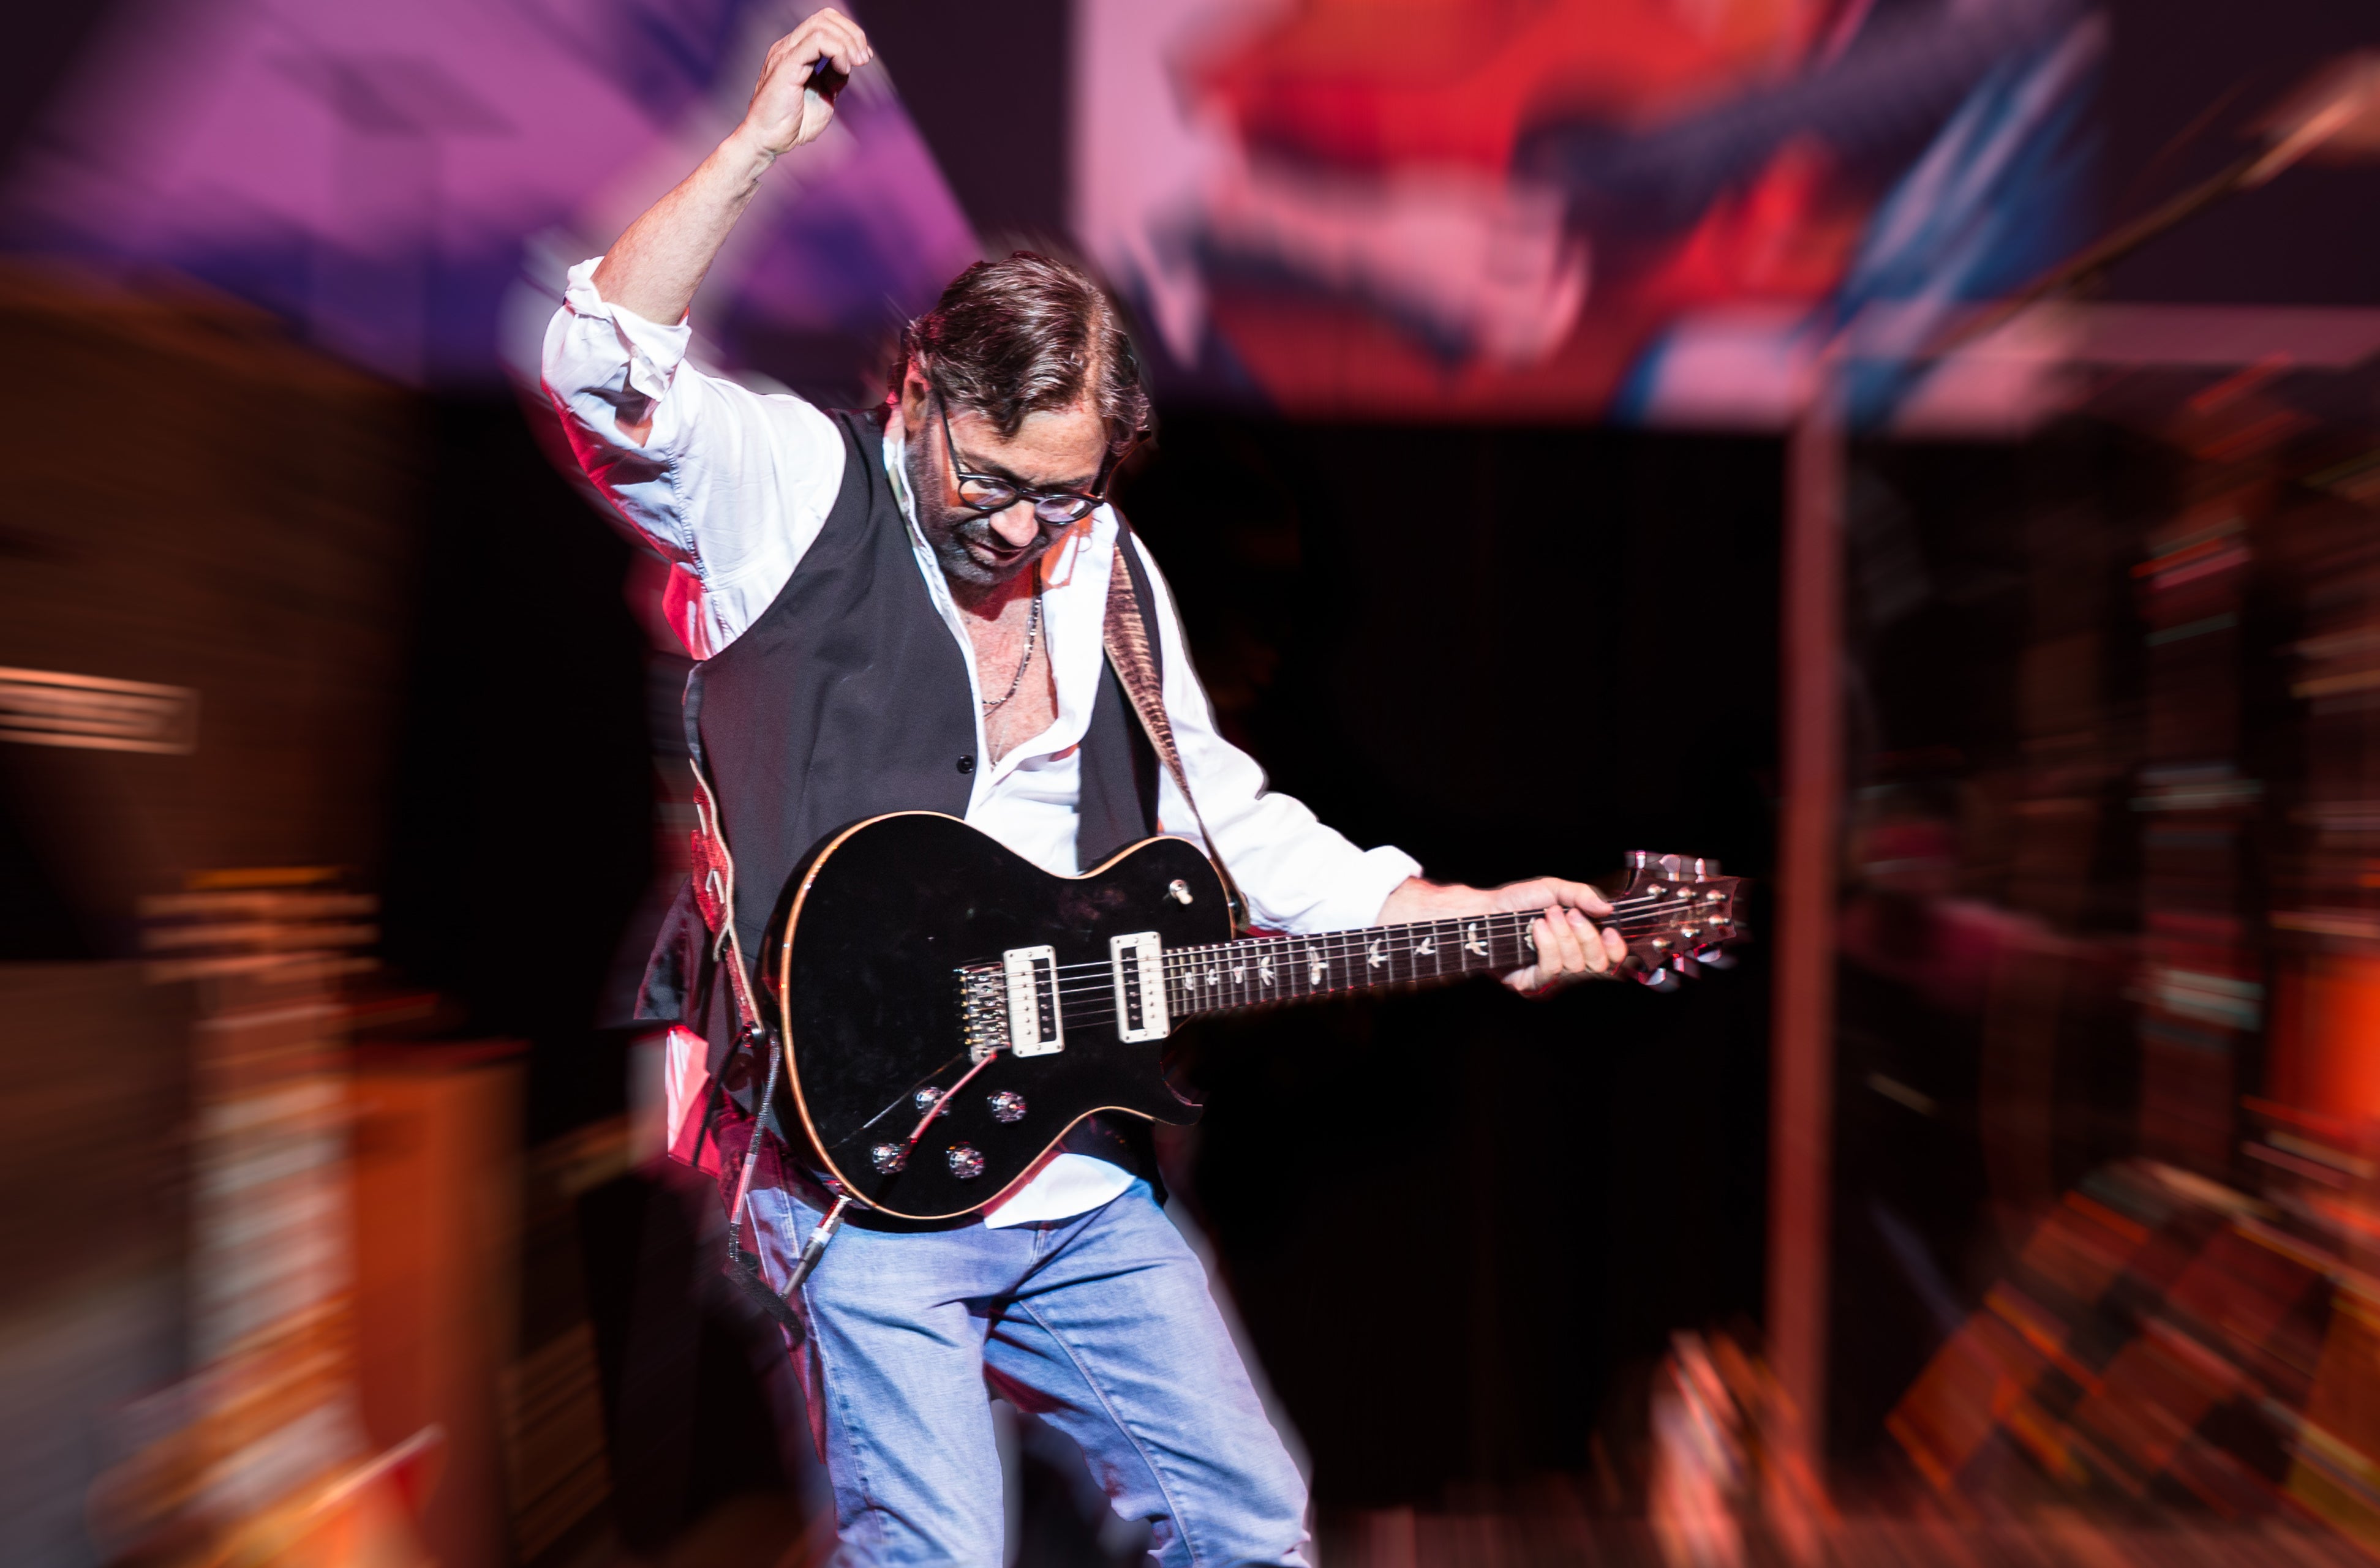 Al Di Meola - The Electric Years free presale password for early tickets in Ft Lauderdale